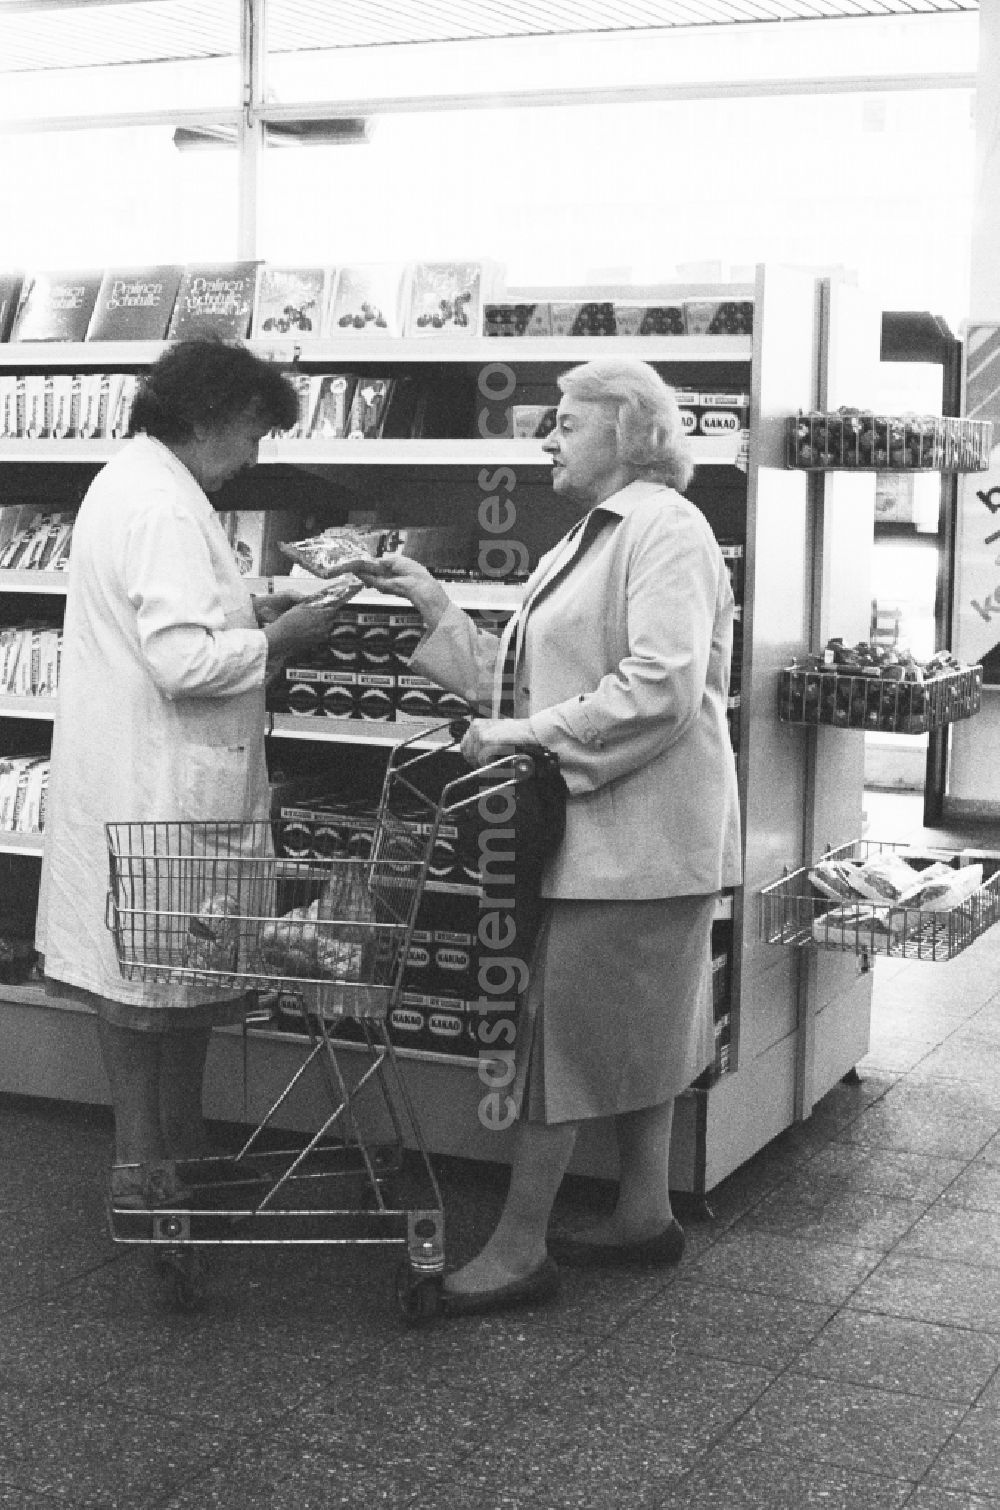 GDR picture archive: Berlin - A woman shopping in a department store in Berlin, the former capital of the GDR, the German Democratic Republic. The shelves are filled partly with East products as well with Western products